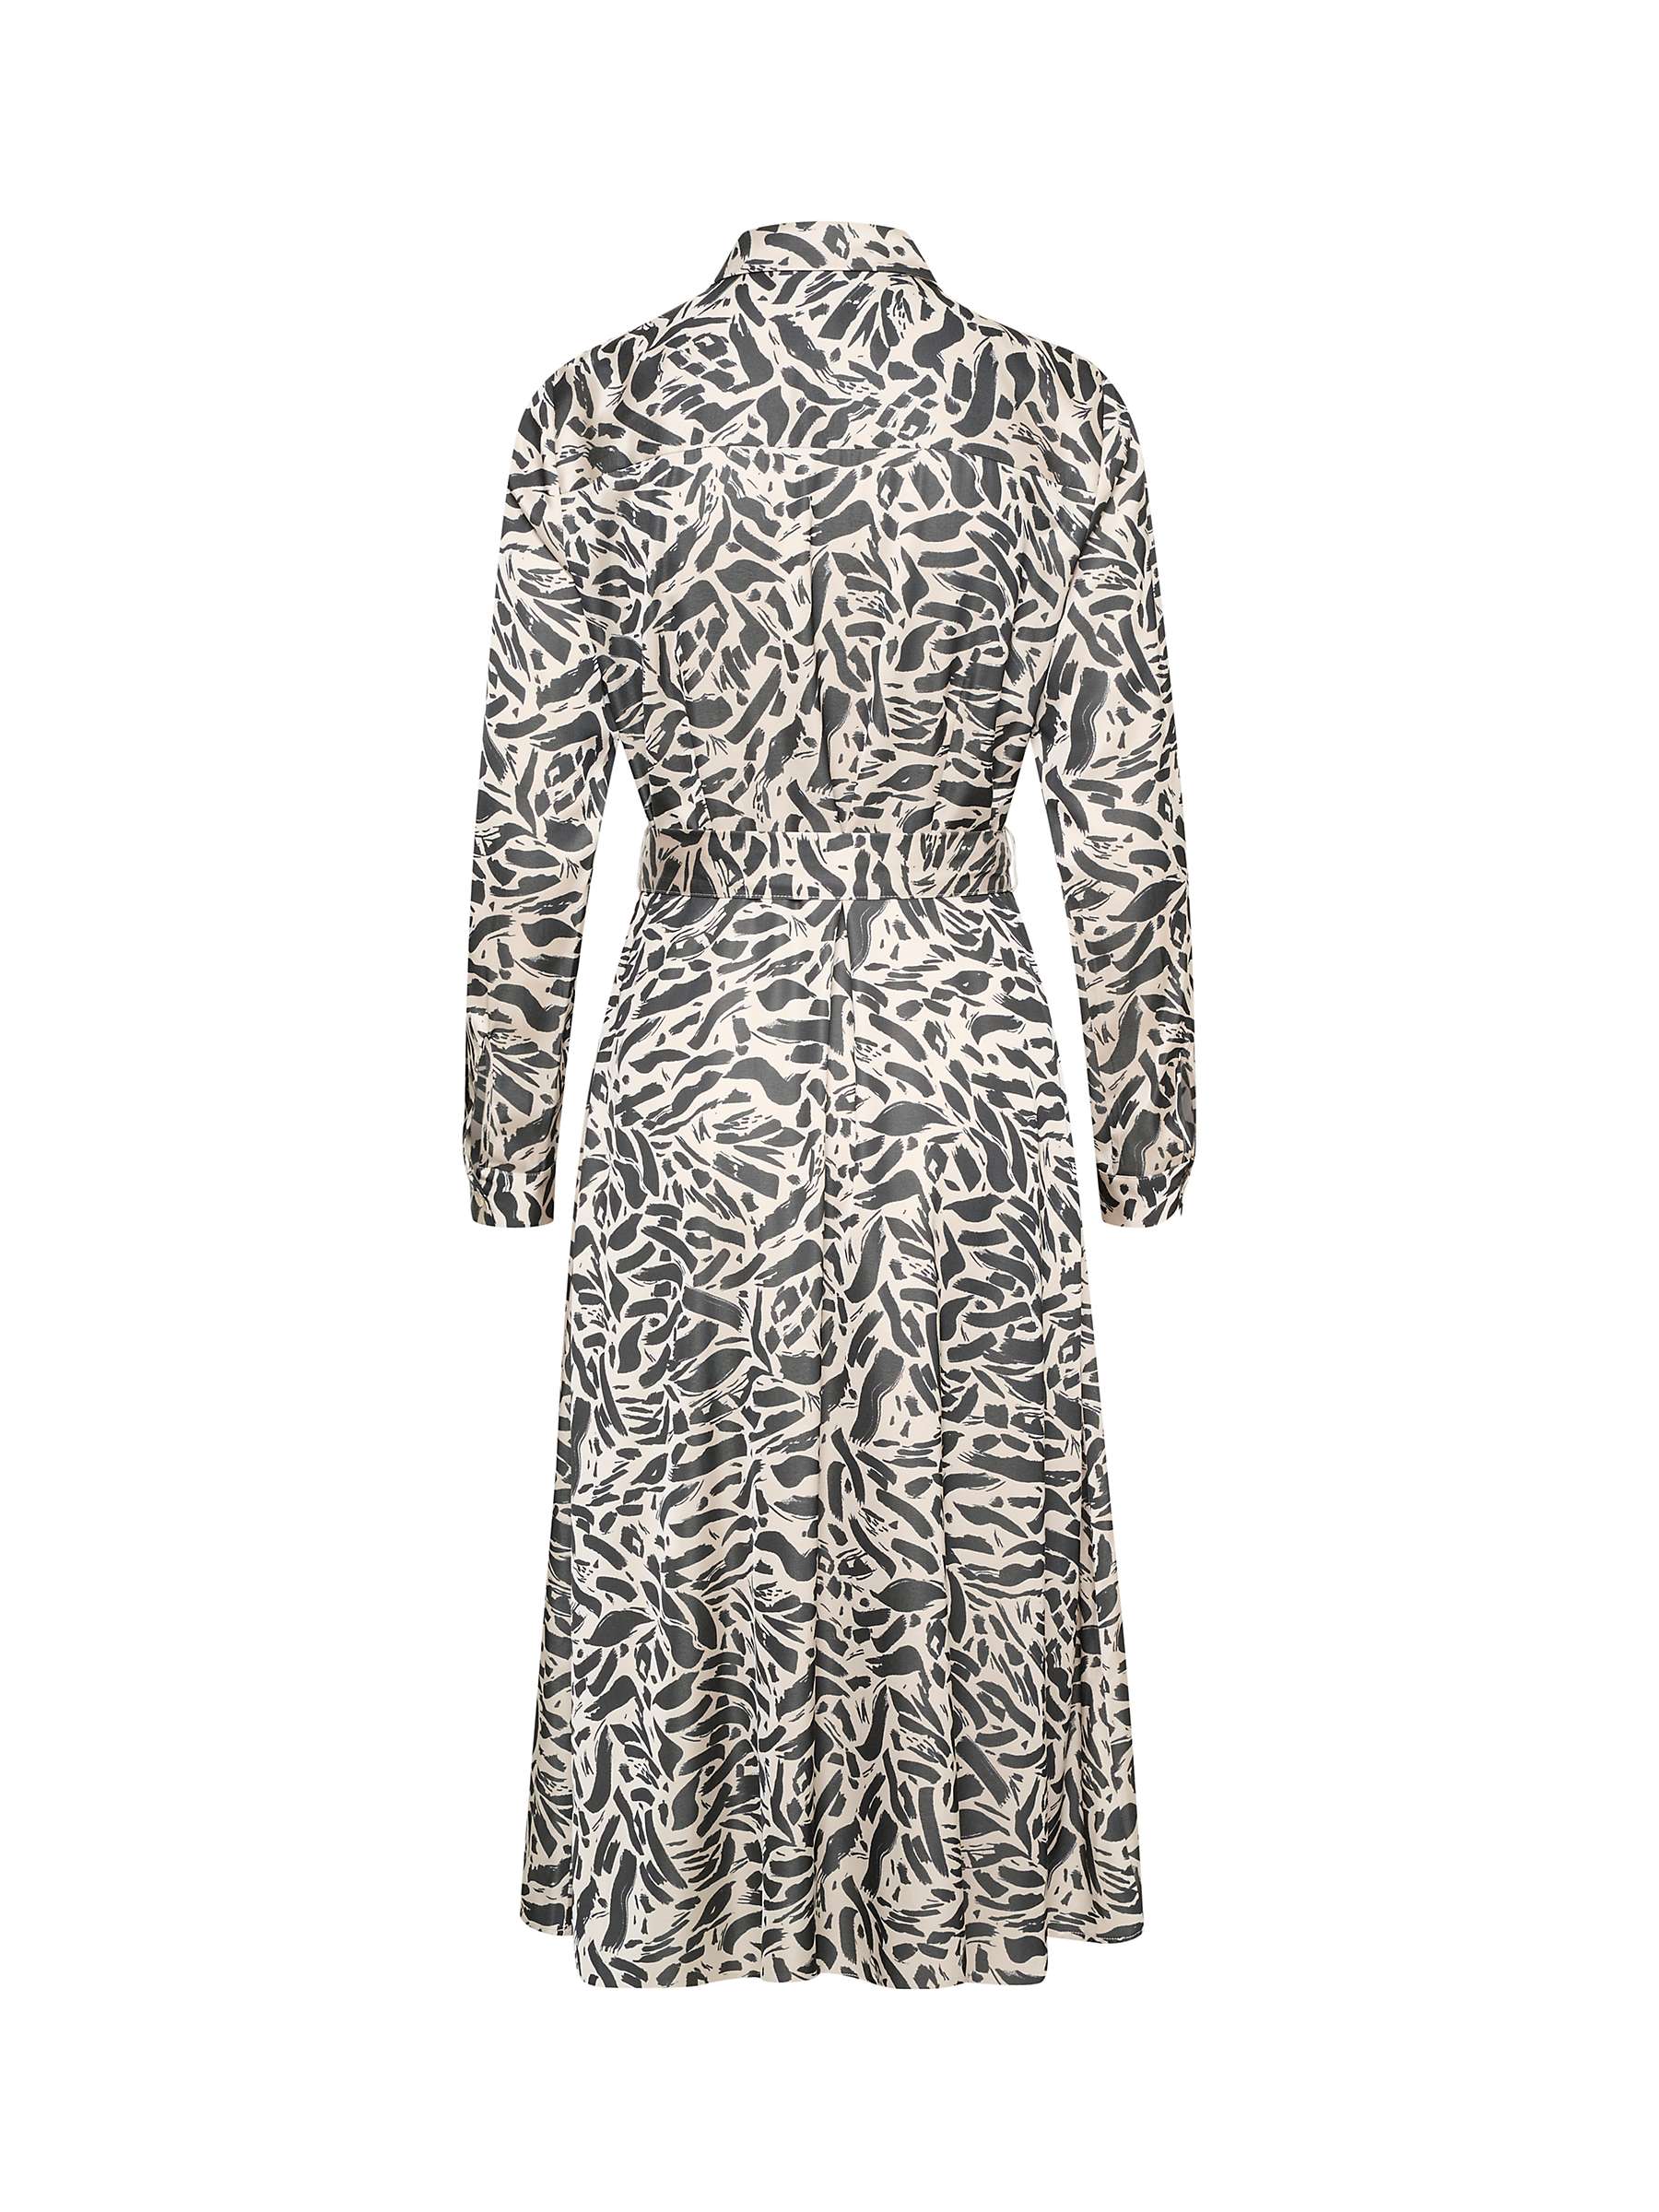 Buy Part Two Shelby Stroke Print Dress, Whitecap Grey Online at johnlewis.com